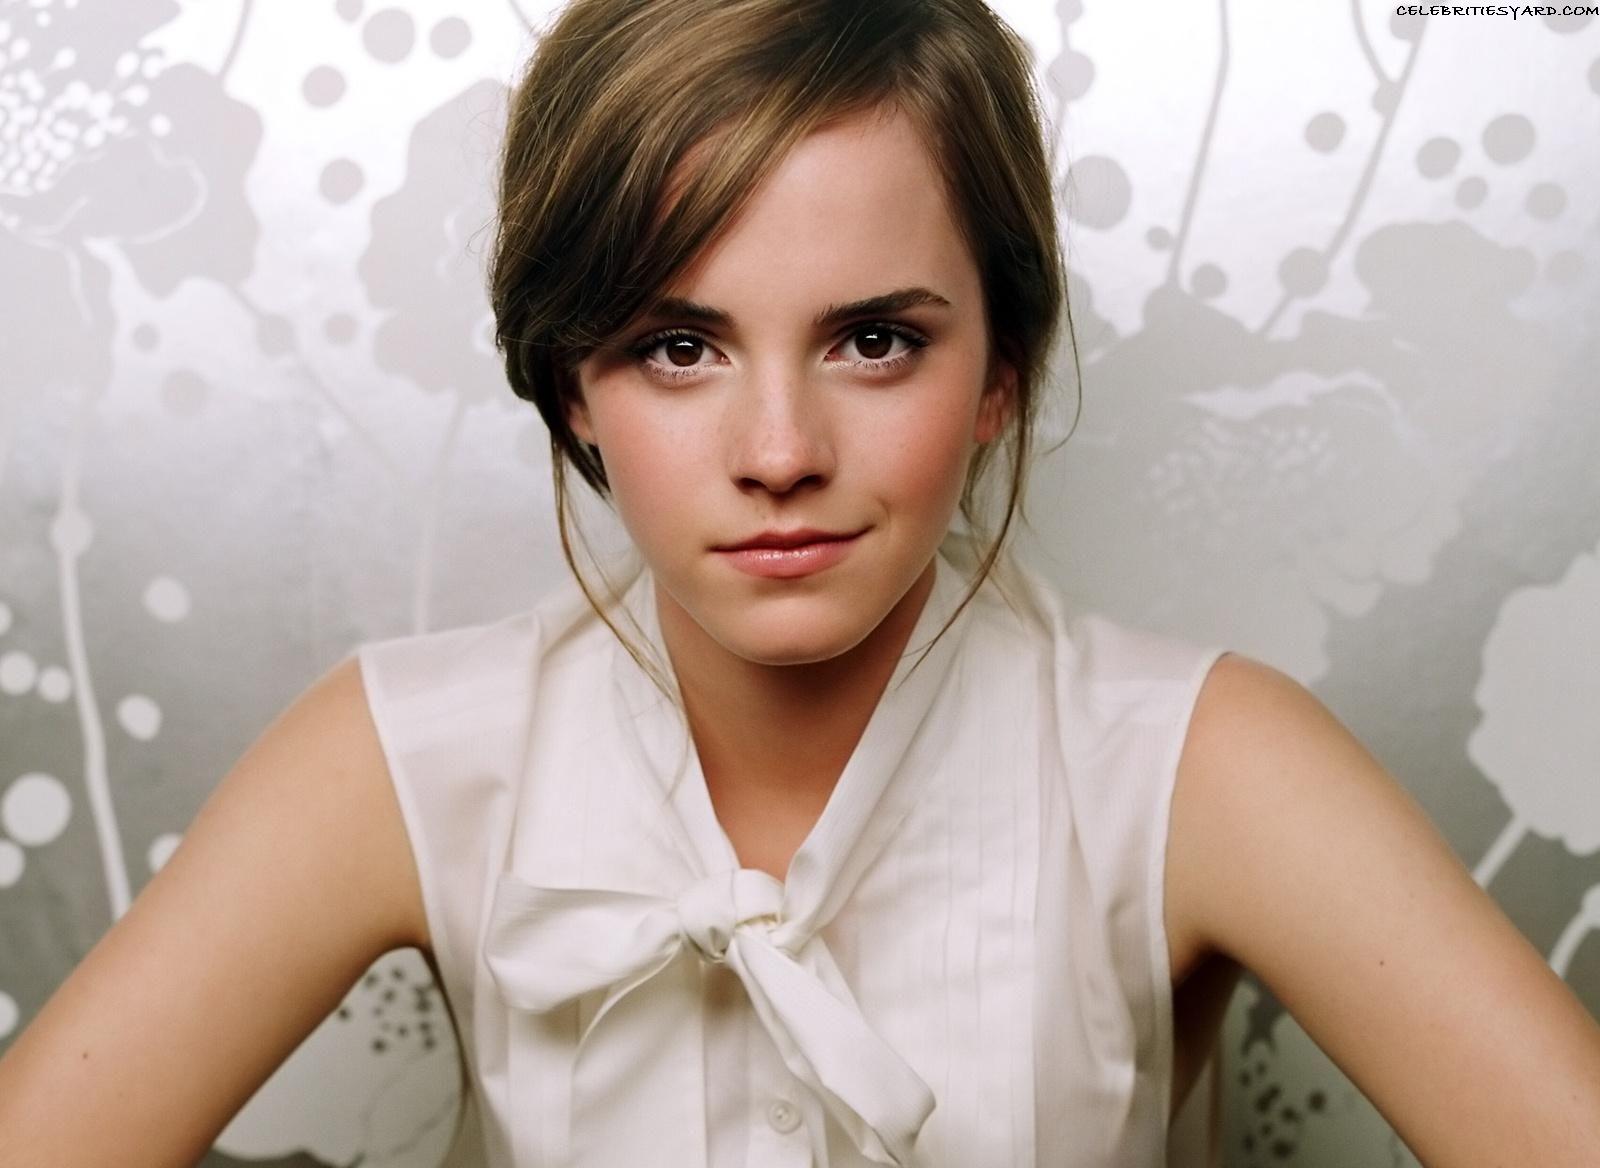 Celebrity Hairstyle of Emma Watson - SheClick.com